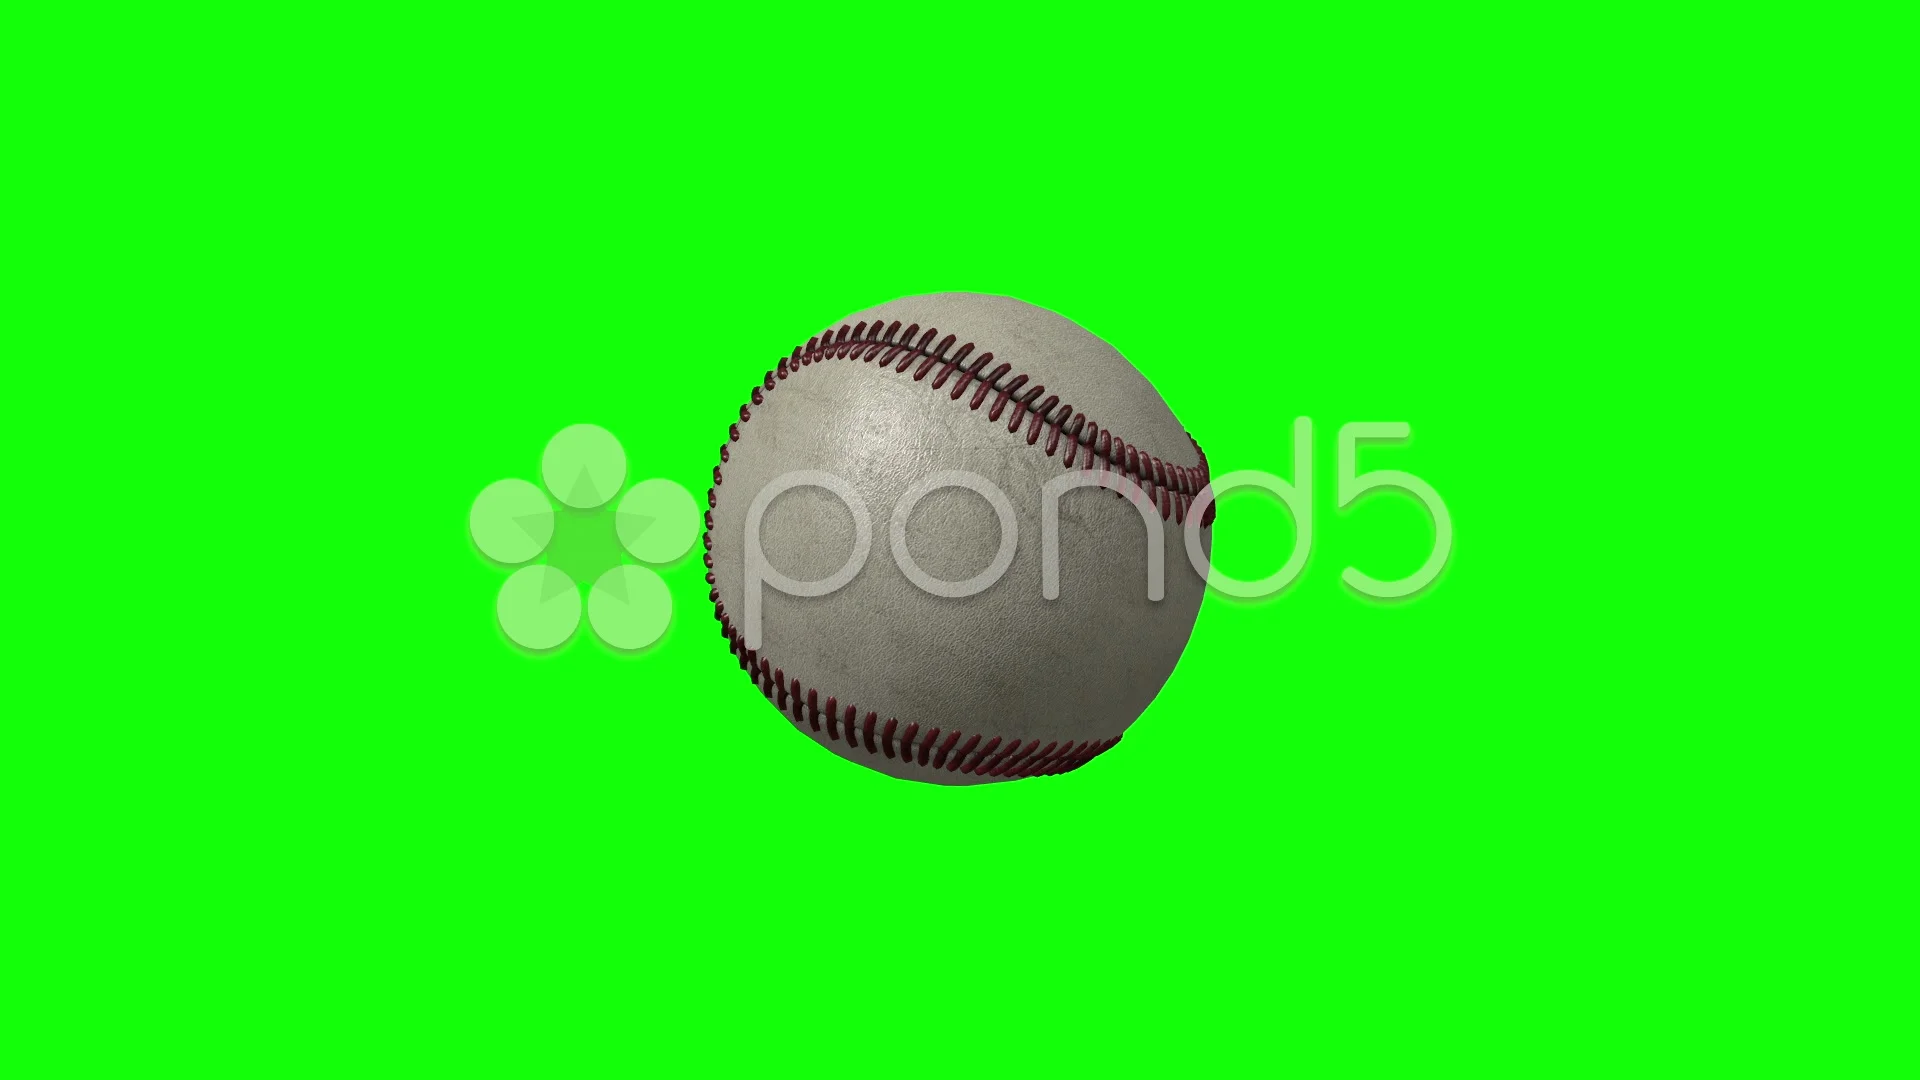 What your baseball position says about you #baseball #greenscreen #fir